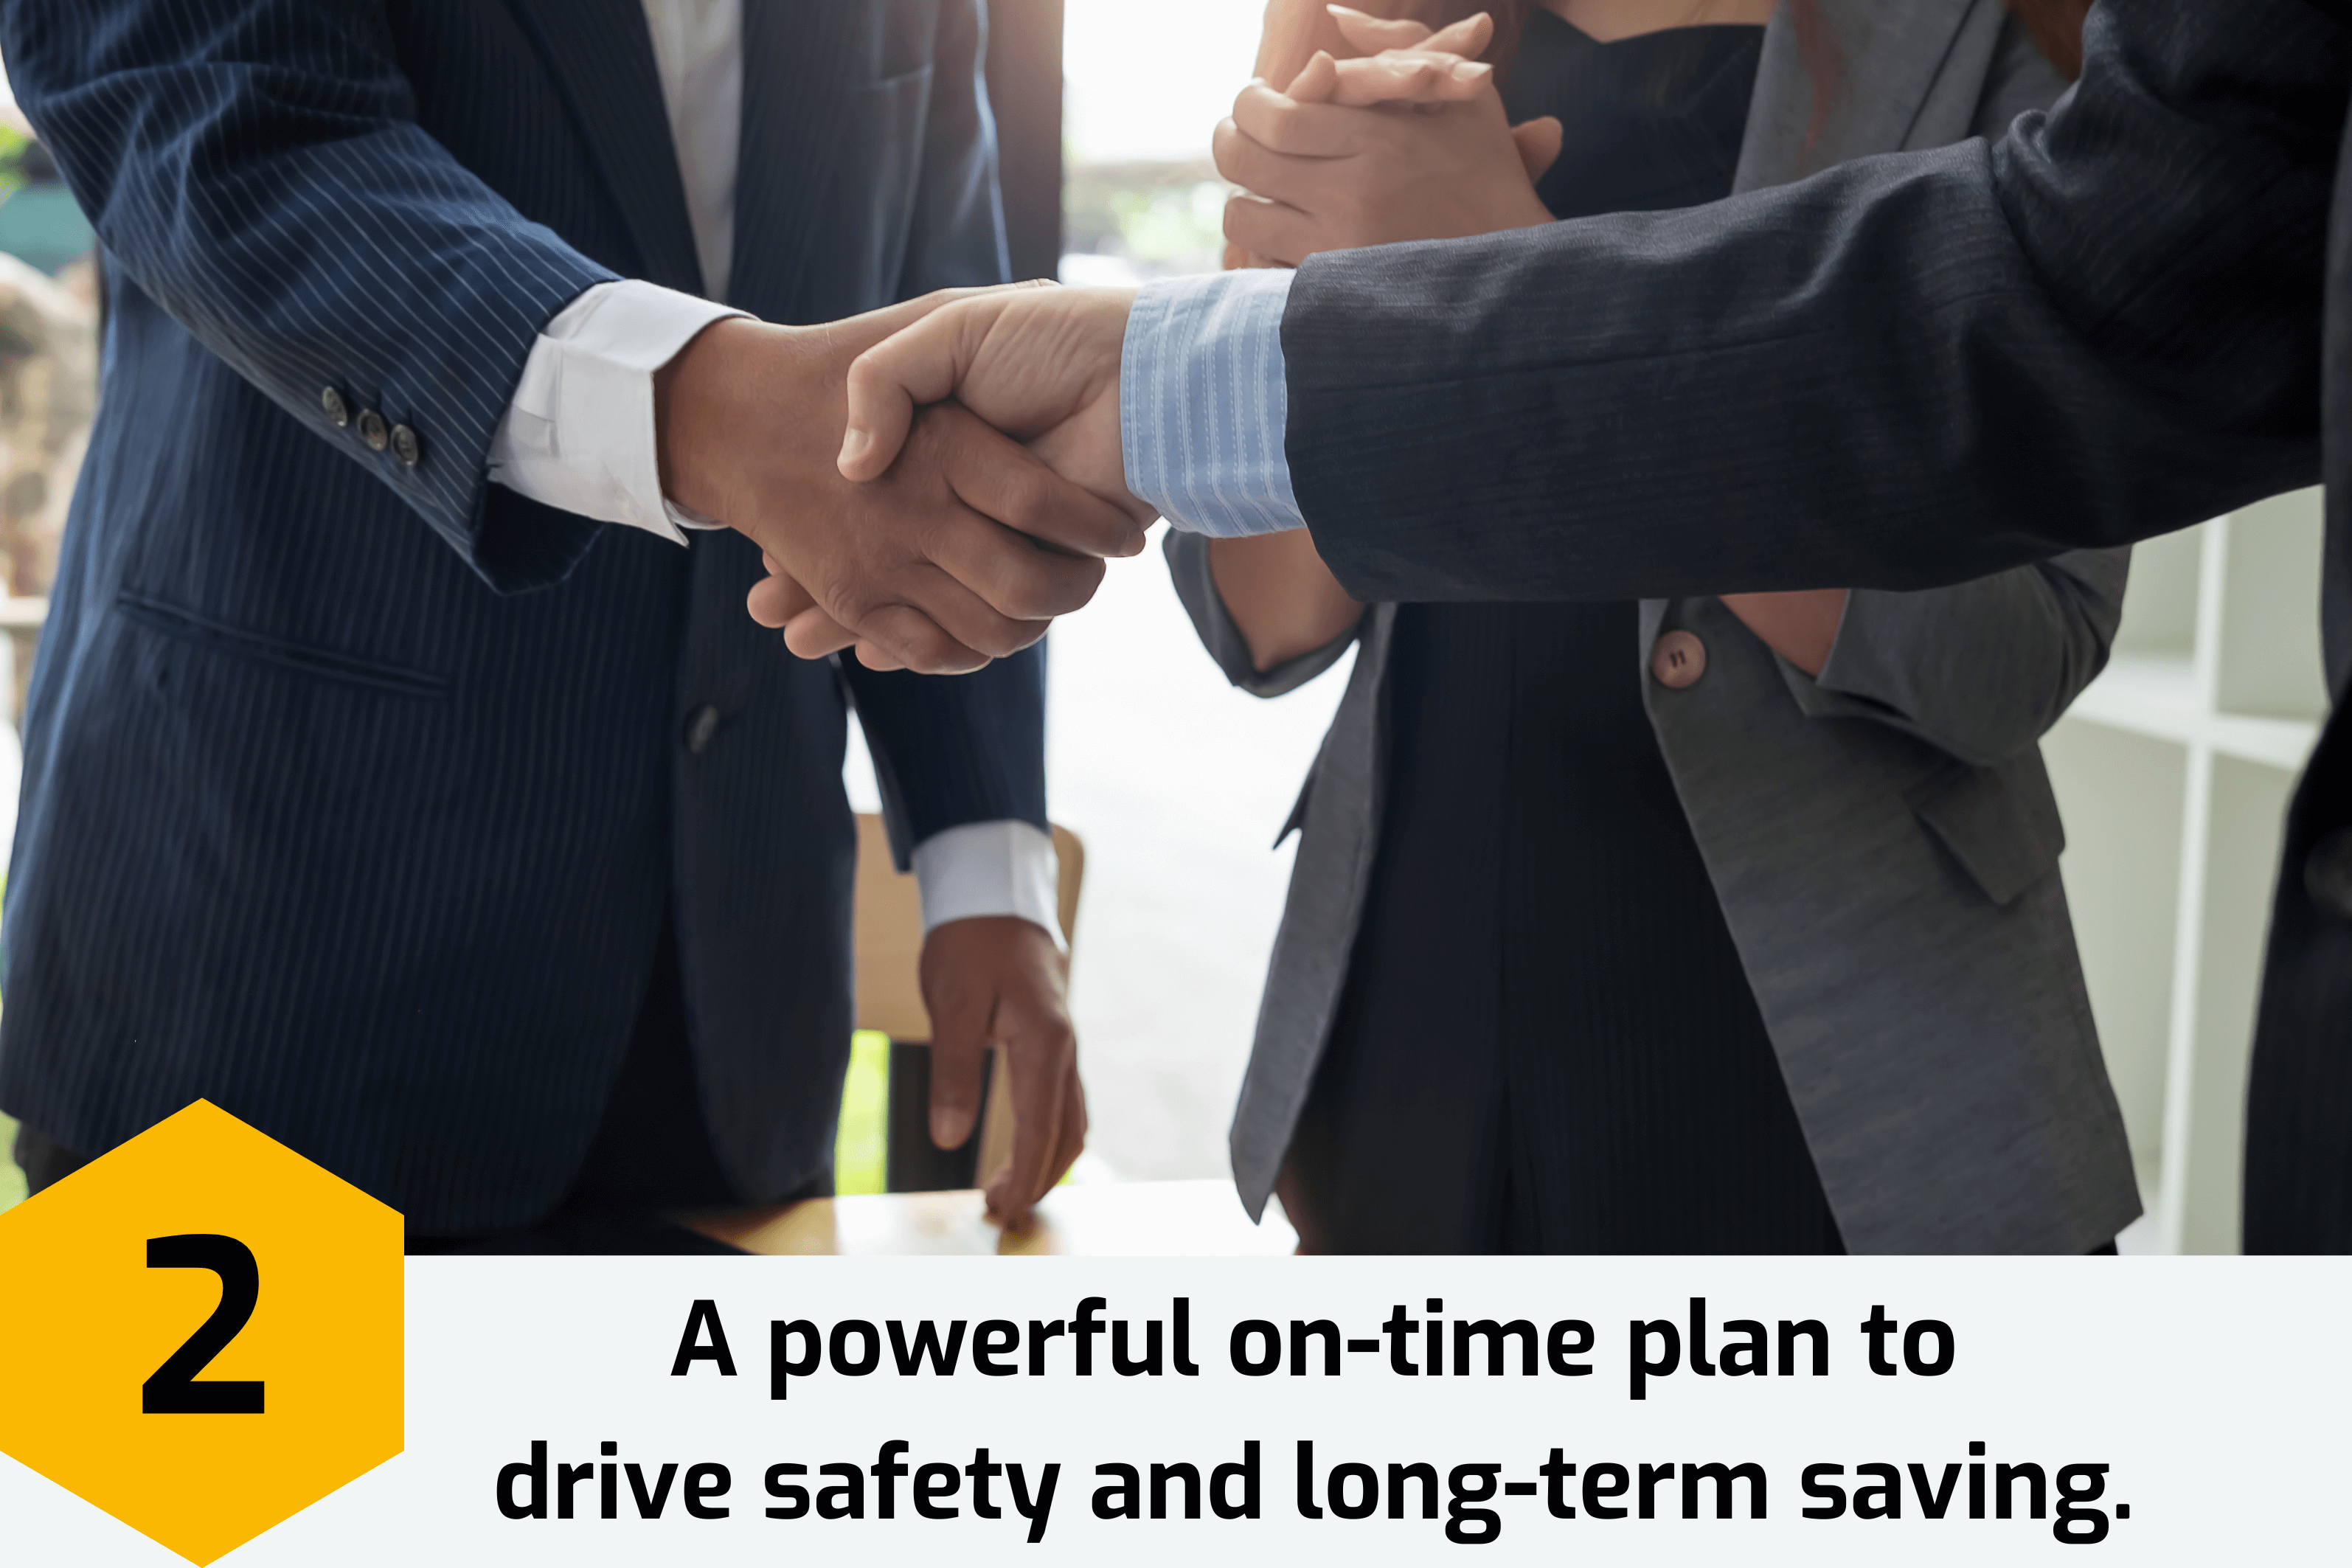 A POWERFUL on-time plan to drive safety and long-term saving (1)